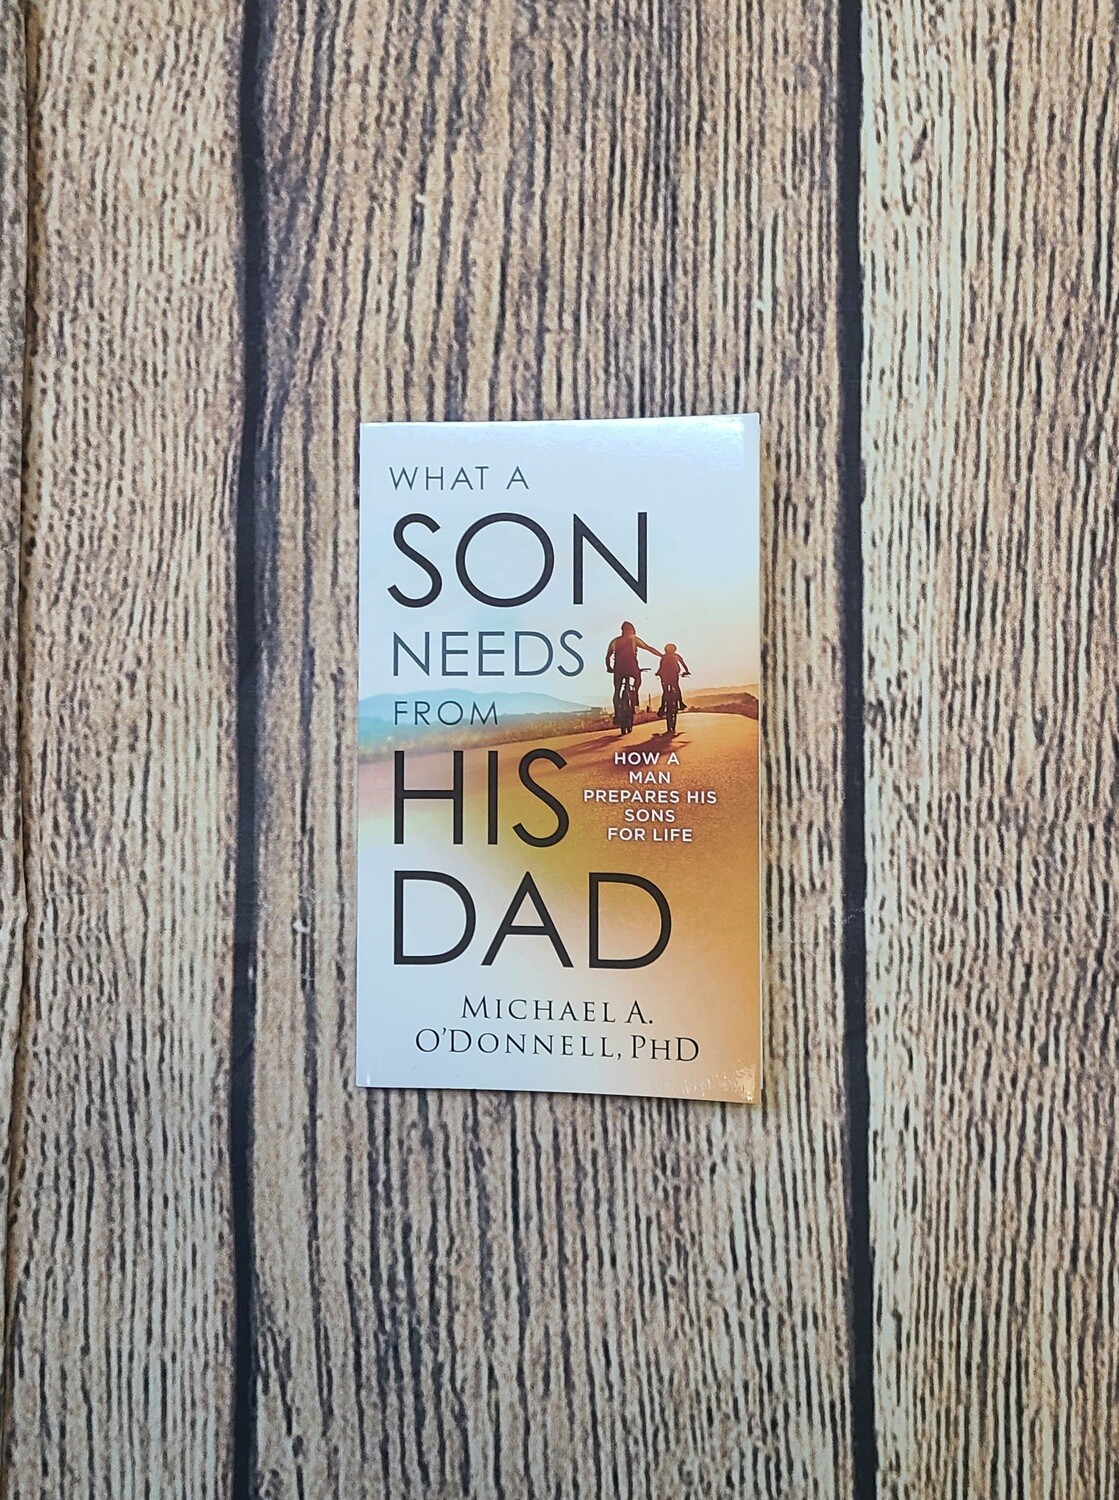 What A Son Needs from His Dad by Michael A. O'Donnell, PHD